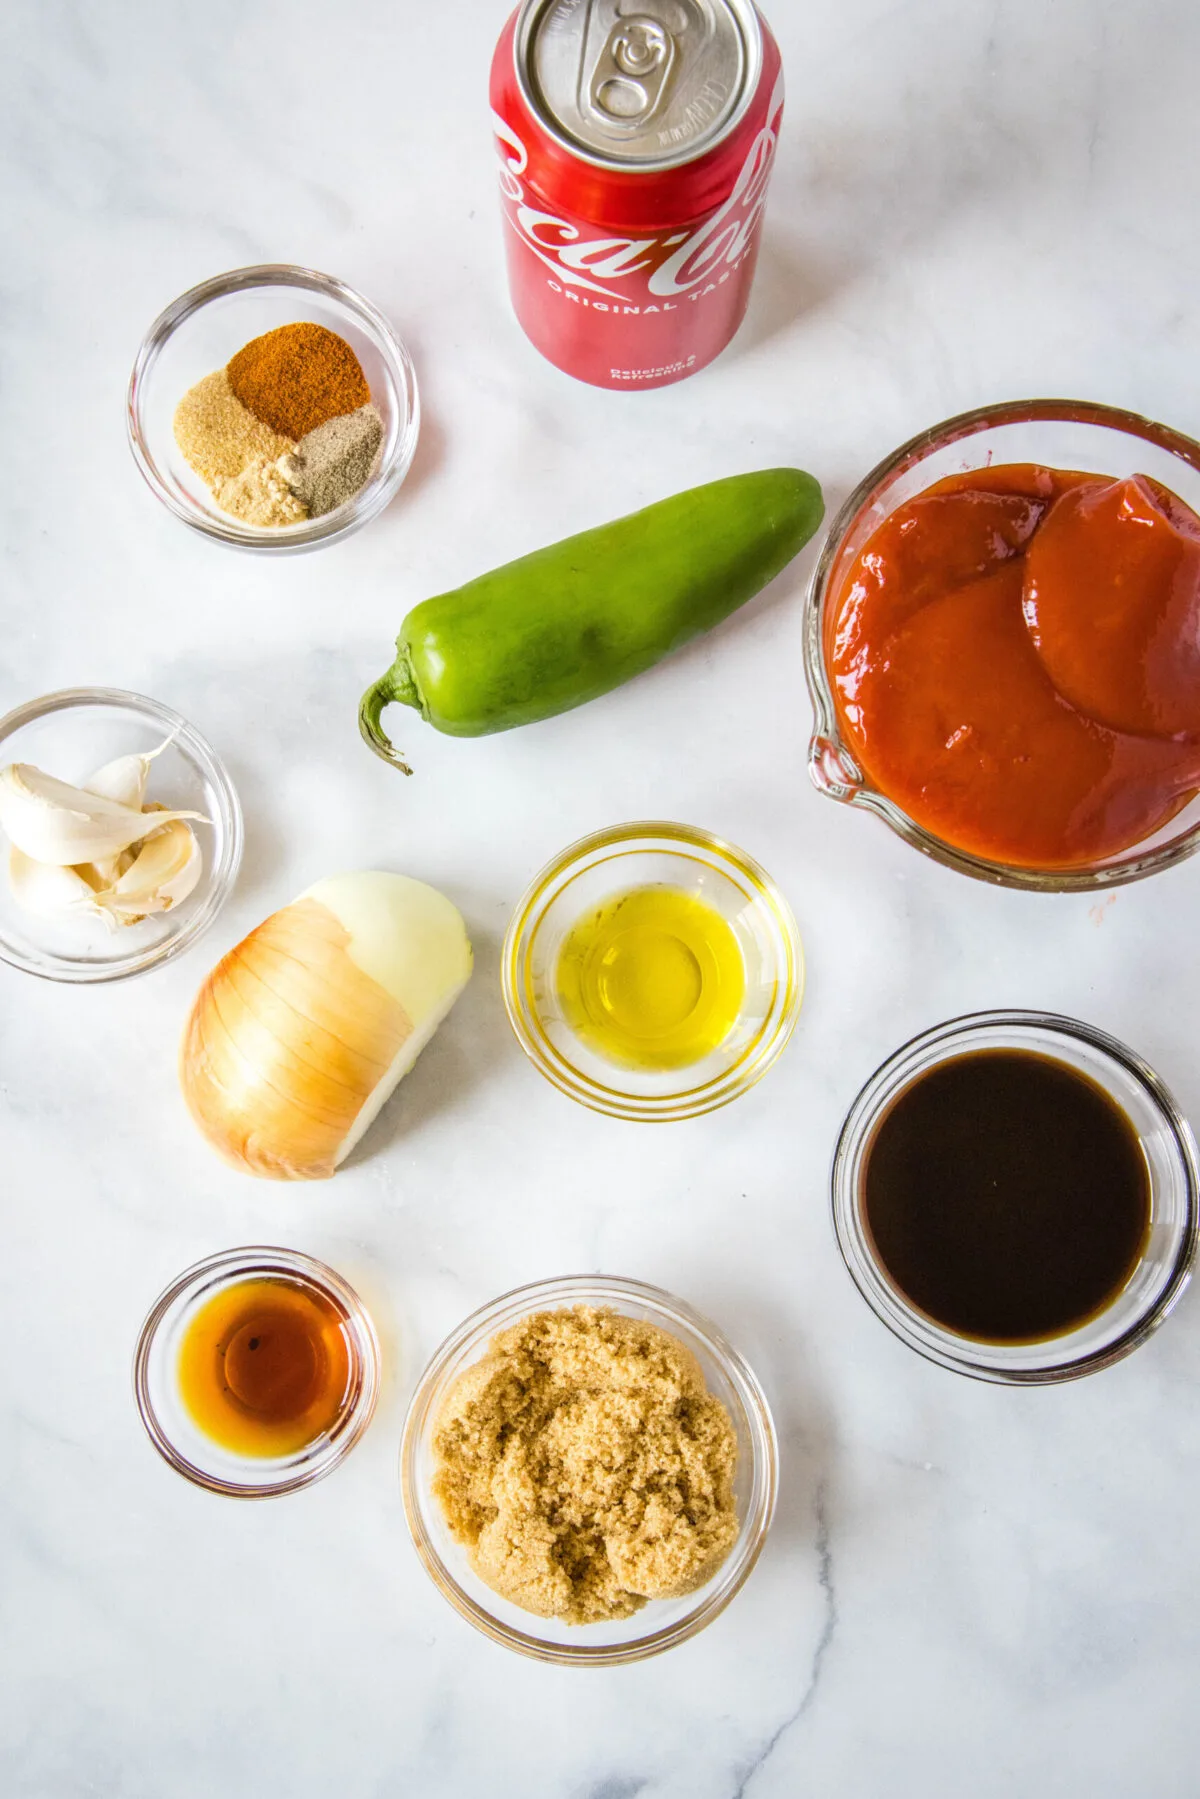 Overhead view of the ingredients needed for Coca-Cola BBQ sauce: a can of Coke, a bowl of ketchup, a jalapeño, a bowl of garlic, a bowl of oil, half an onion, a bowl of brown sugar, a bowl of Worcestershire sauce, a bowl of liquid smoke, and a bowl of onion powder, garlic powder, pepper, and paprika